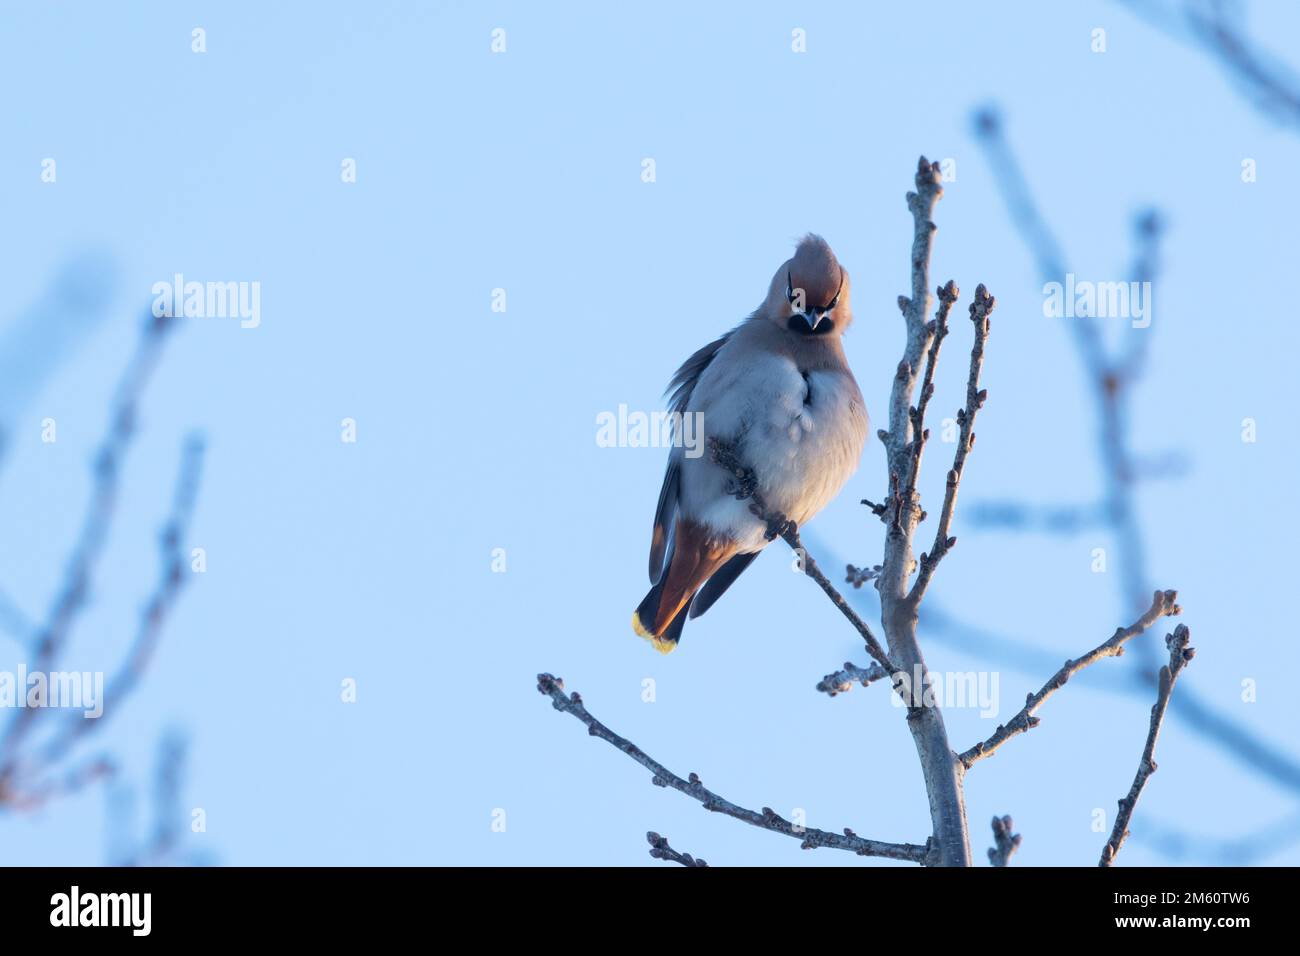 Bohemian waxwing perched and cleaning feathers on a winter day in Estonia, Northern Europe Stock Photo